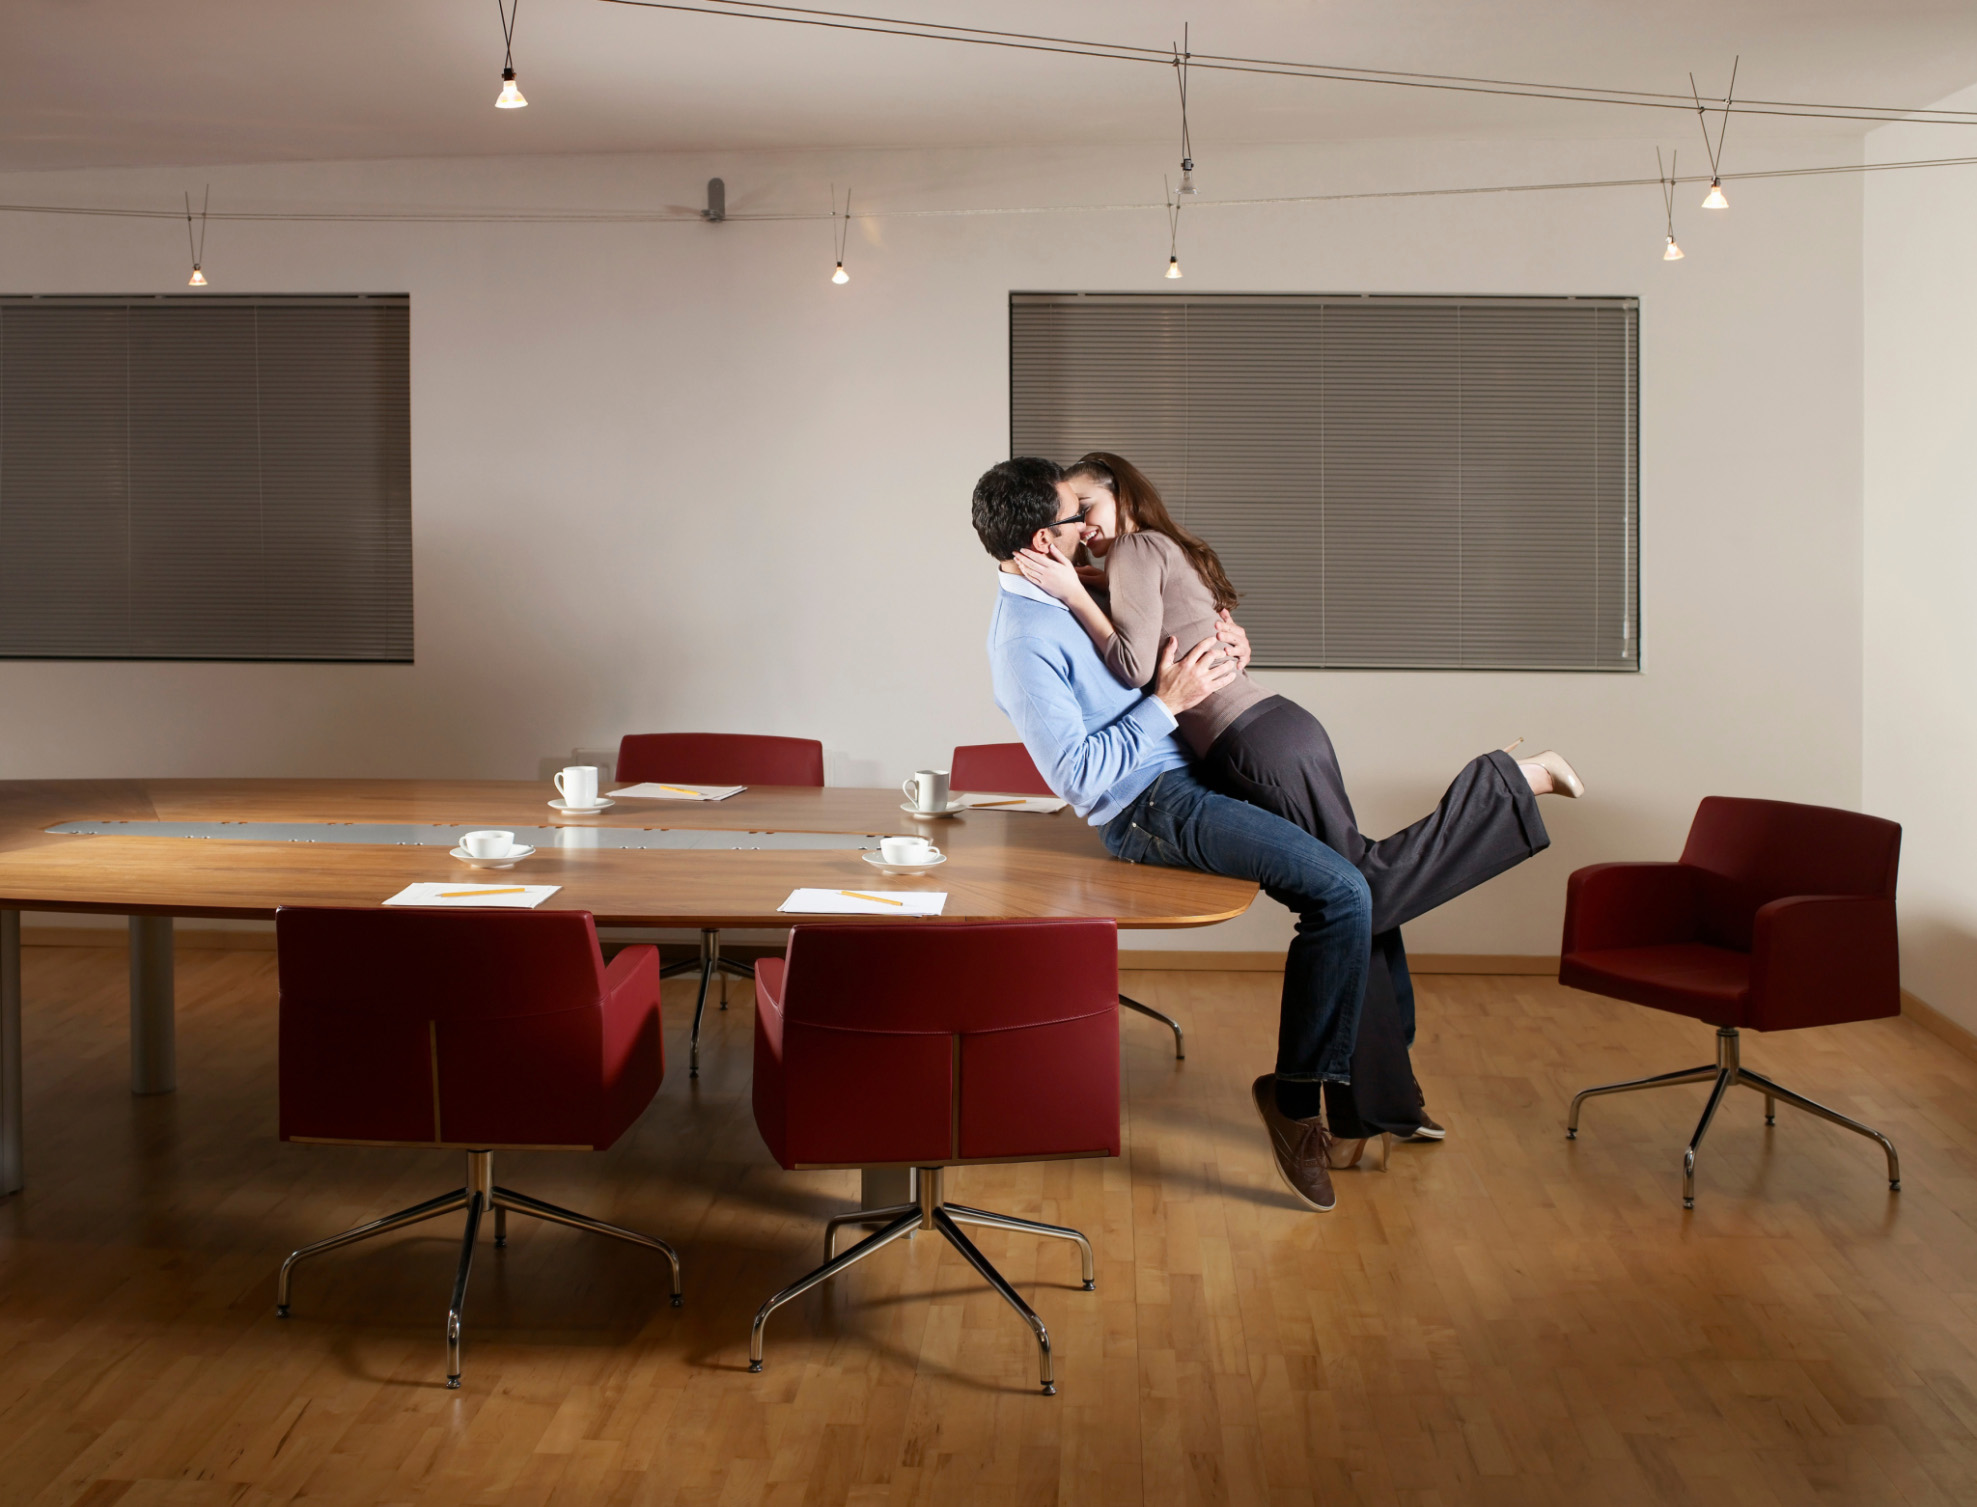 Man and woman kissing in office